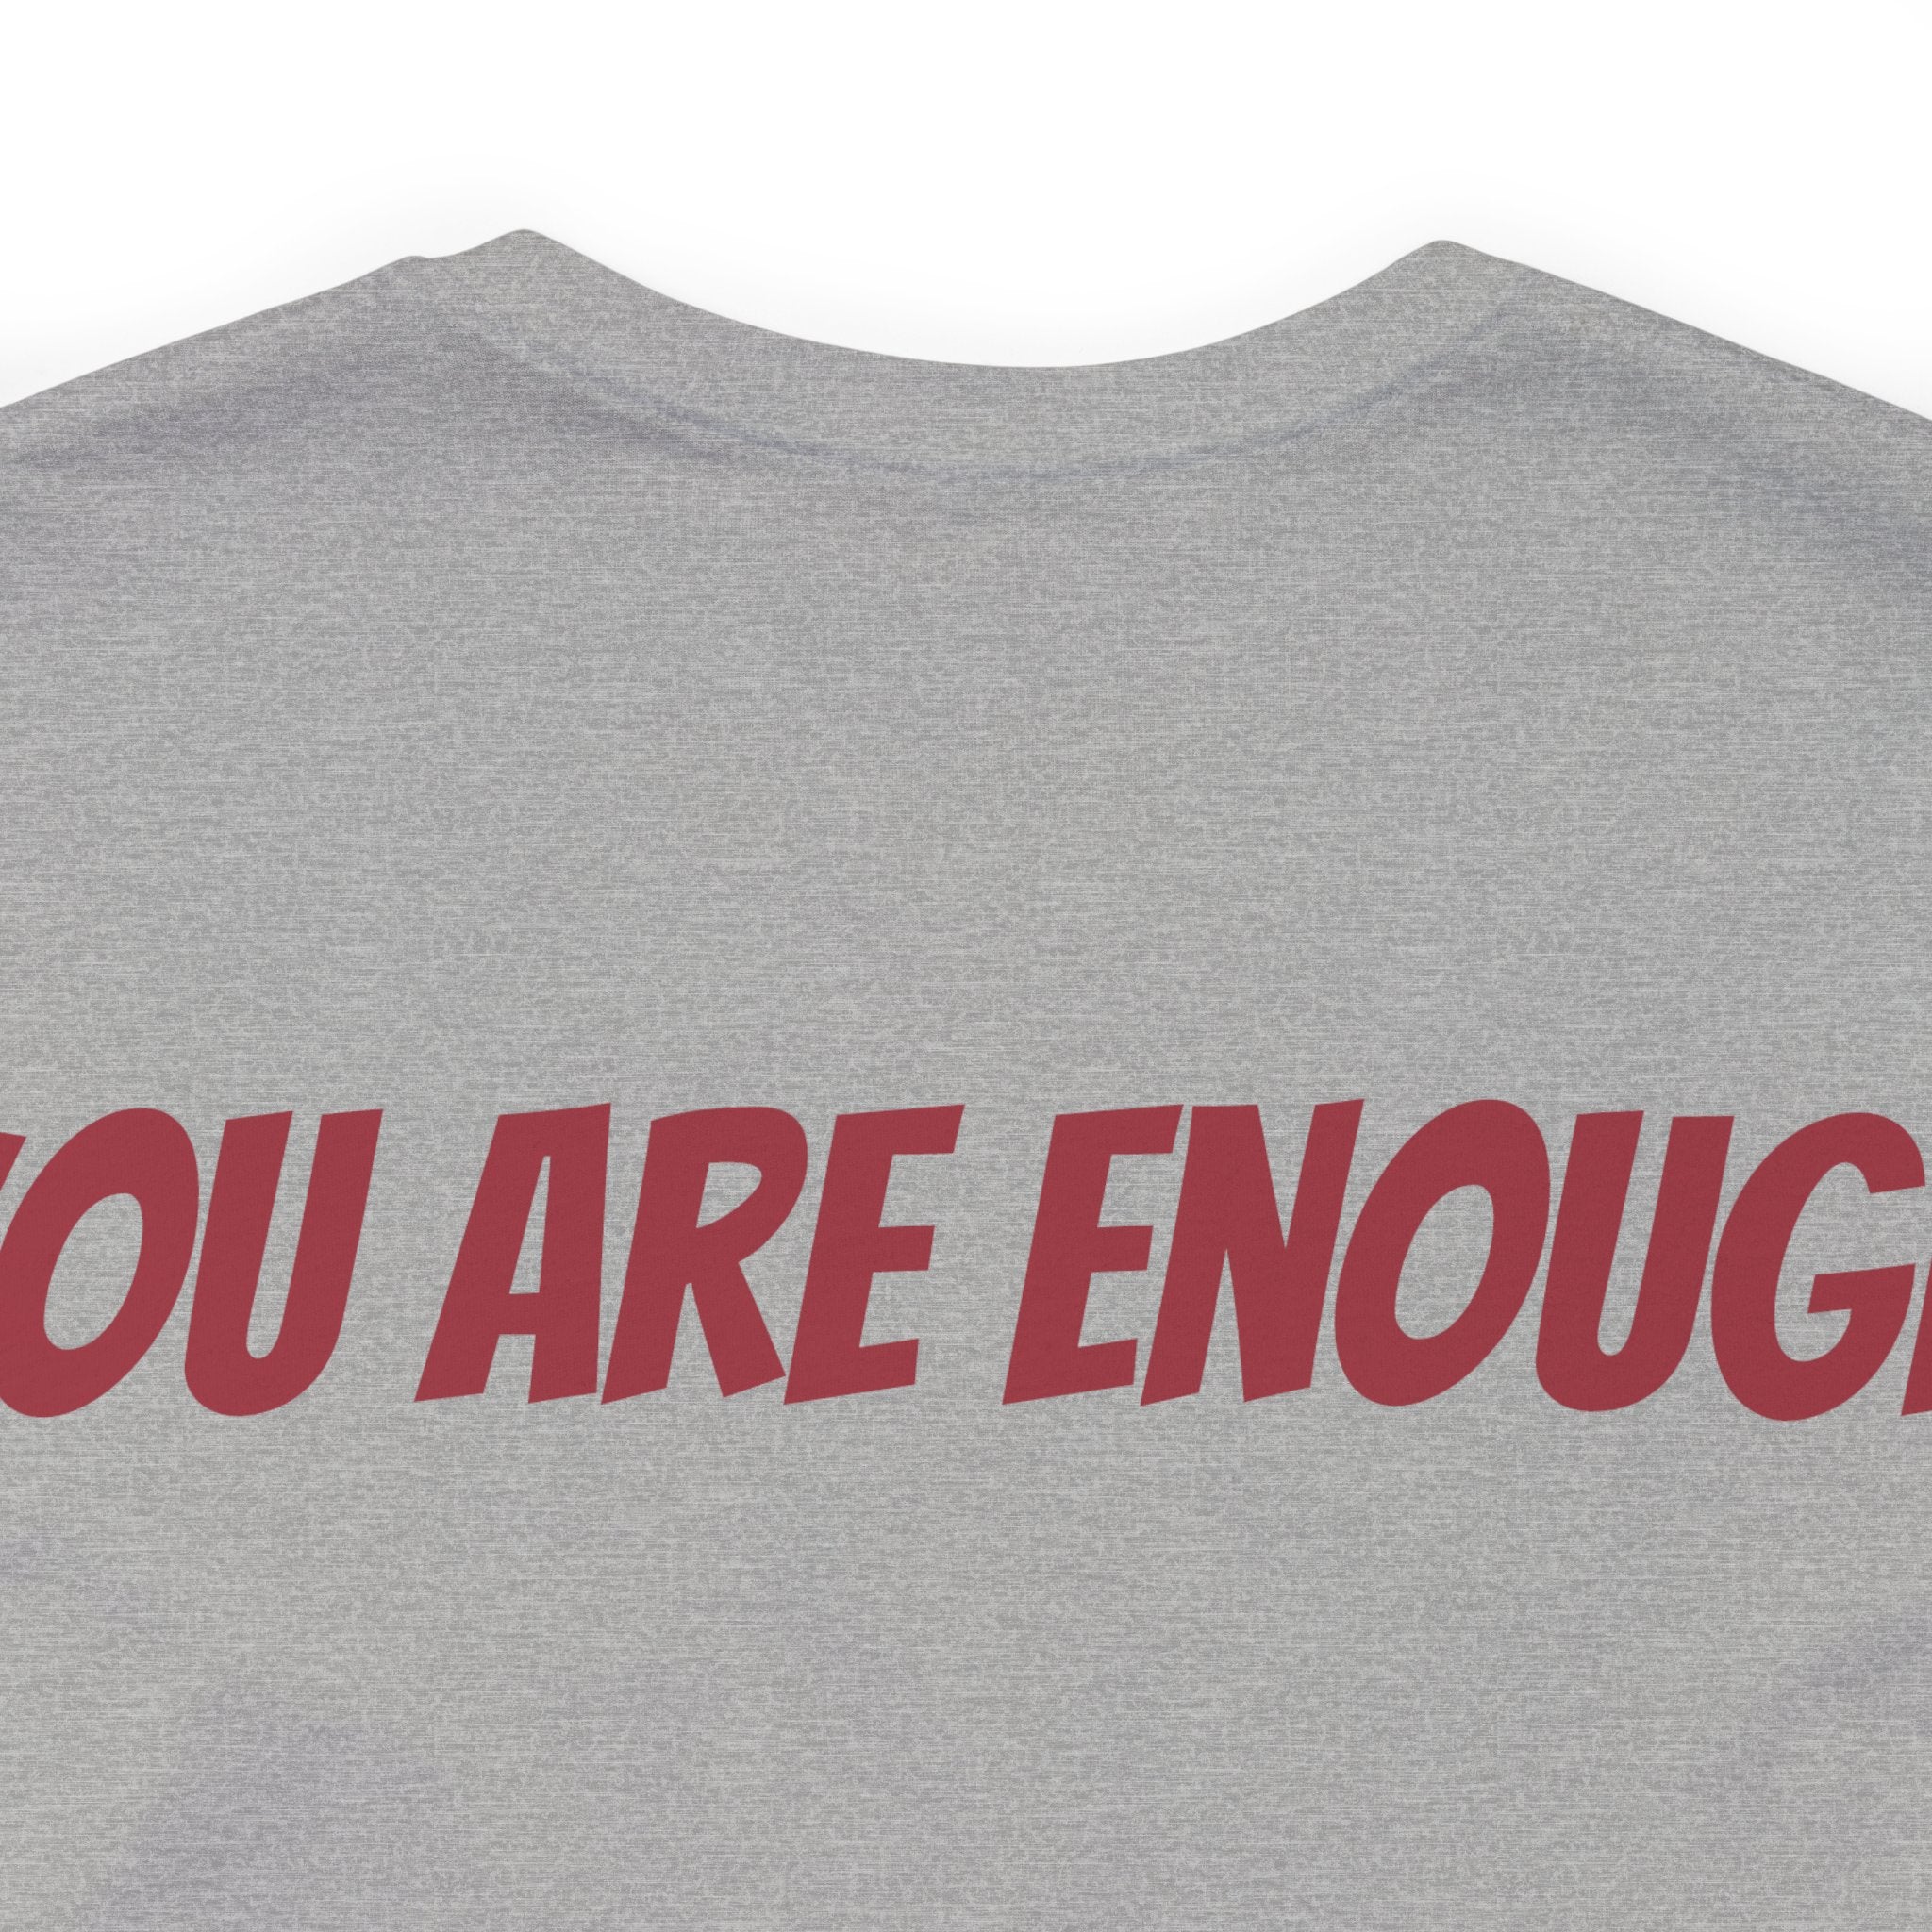 You Are Enough Short Sleeve Tee Bella+Canvas 3001 Athletic Heather Airlume Cotton Bella+Canvas 3001 Crew Neckline Jersey Short Sleeve Lightweight Fabric Mental Health Support Retail Fit Tear-away Label Tee Unisex Tee T-Shirt 4734413695353249847_2048 Printify